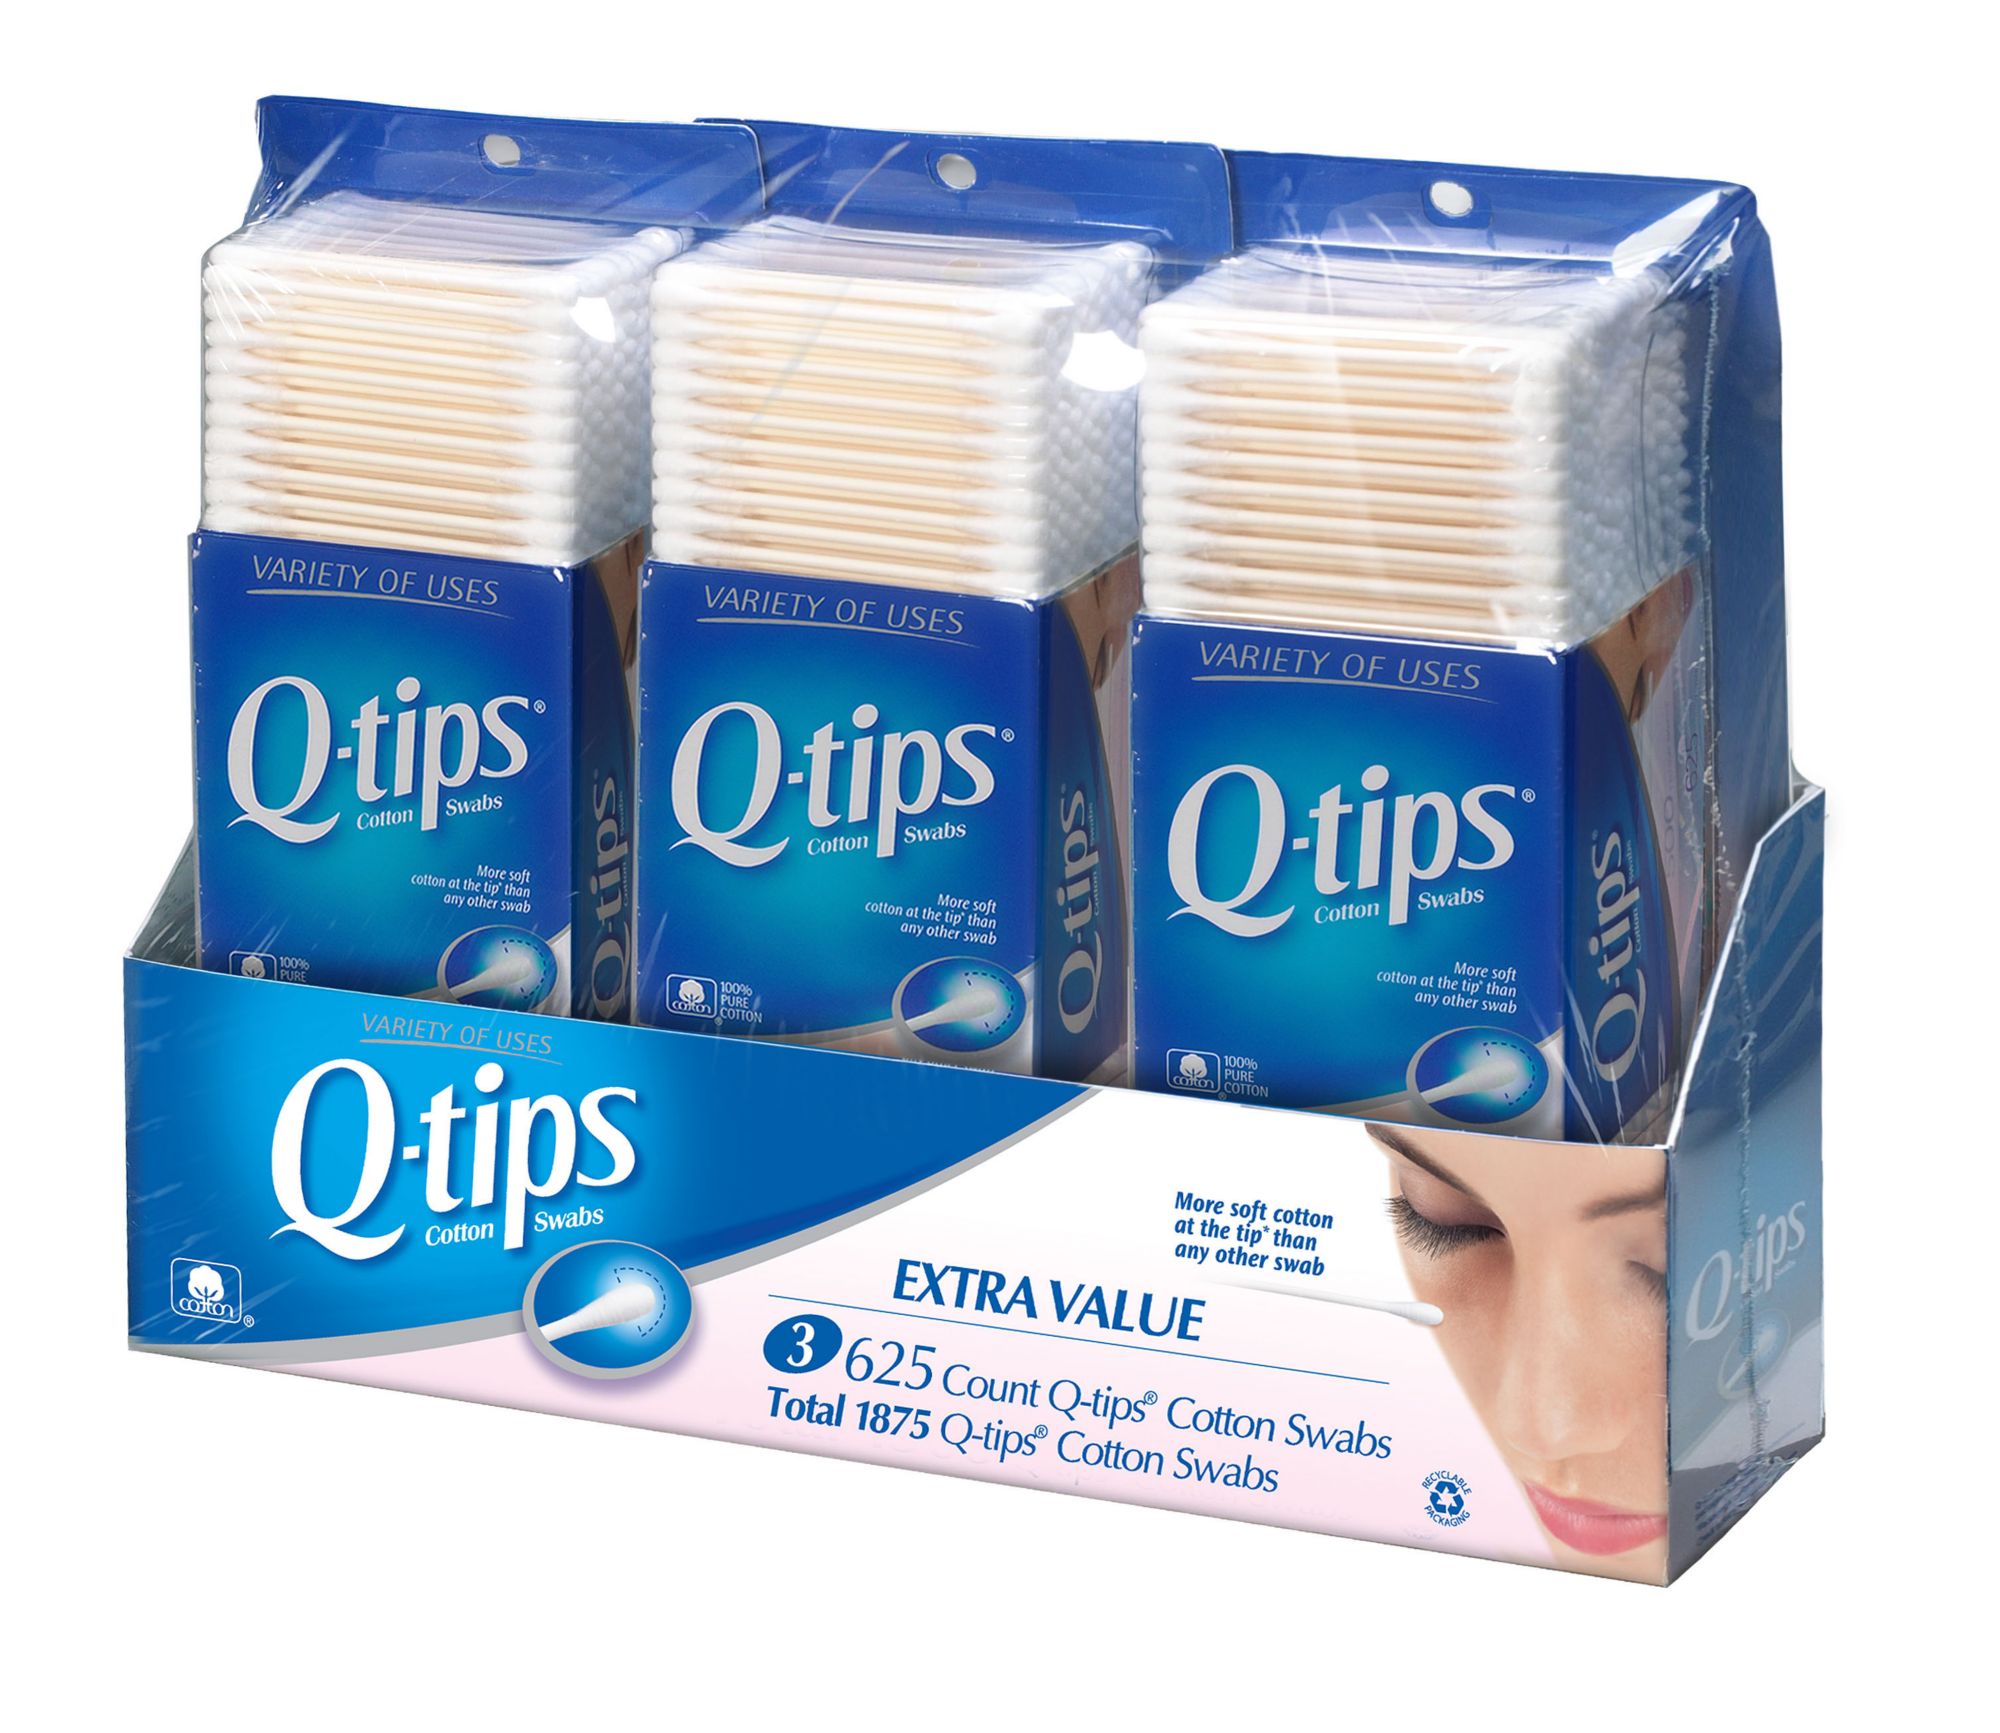 Q-tips Cotton Swabs Purse Travel Size Pack 30 Count Pack of 12